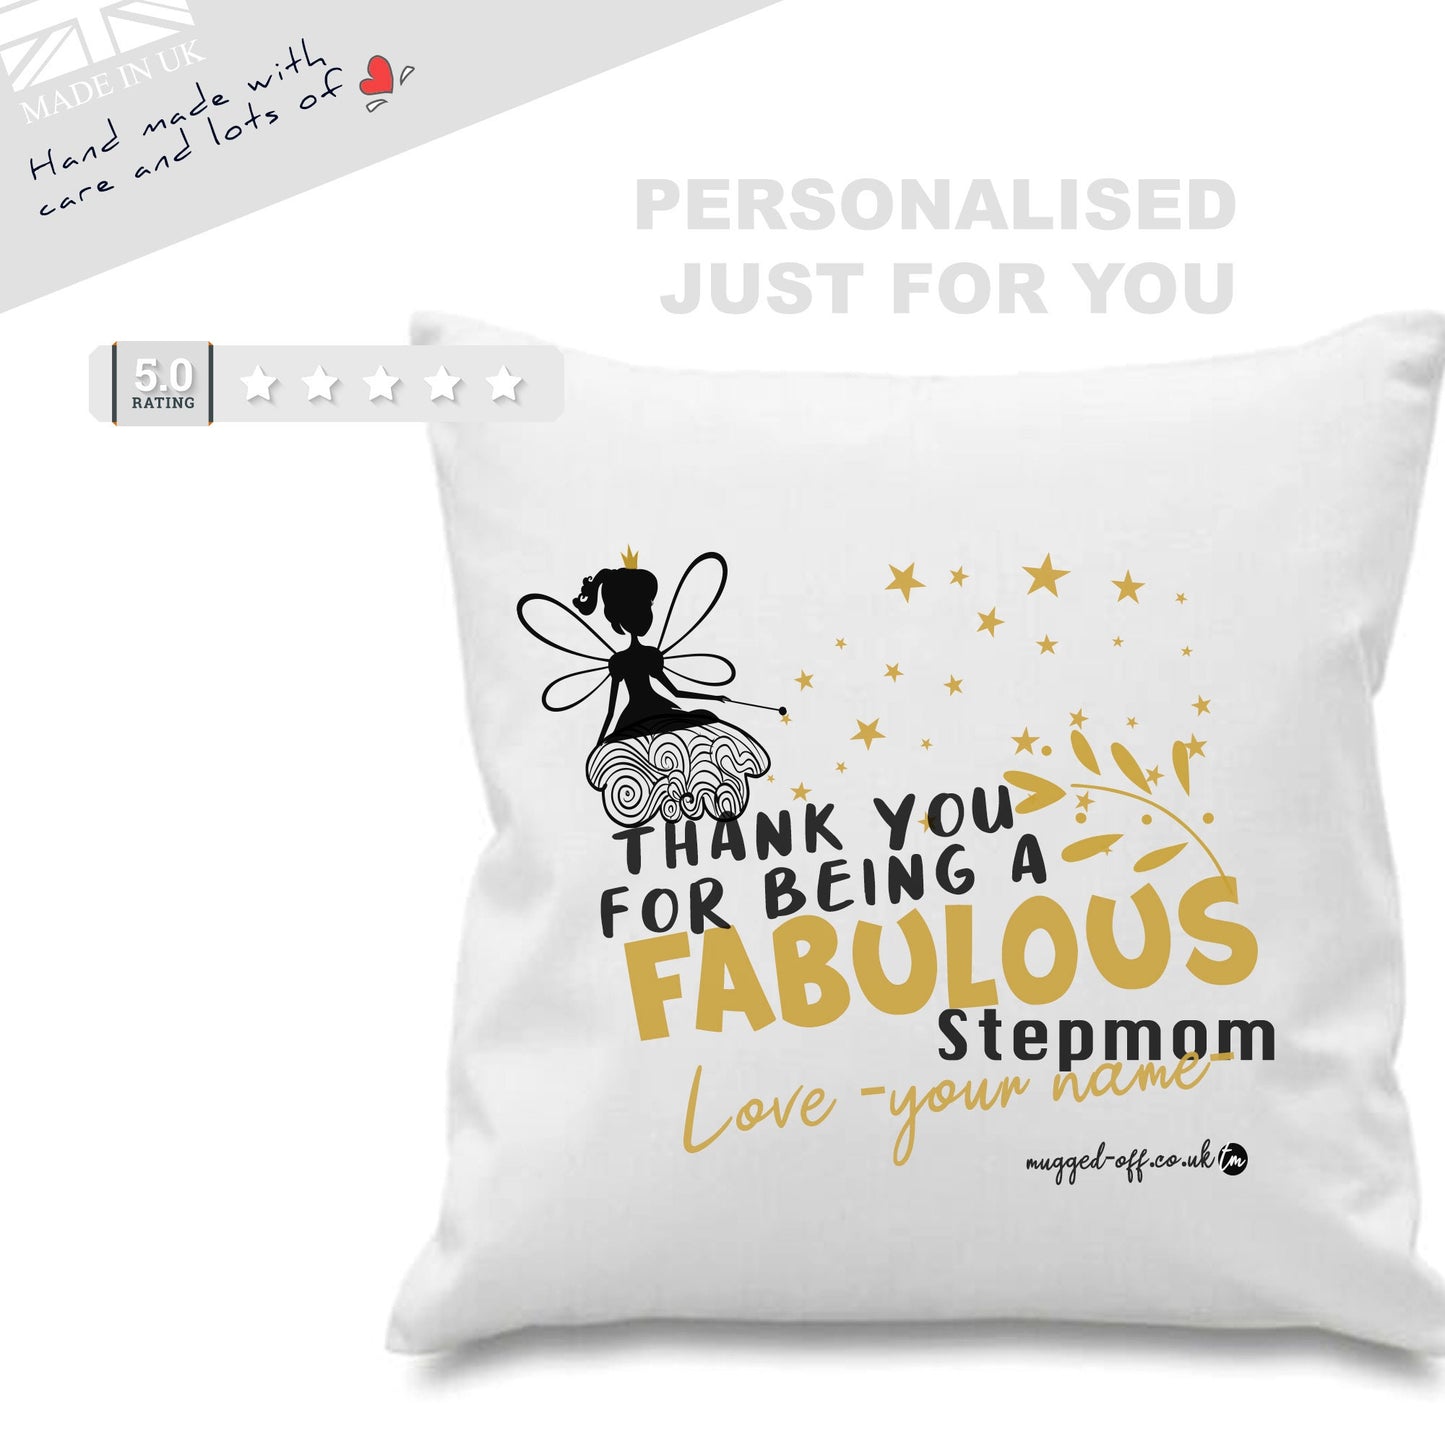 Stepmum Cushion Cover - cushion covers personalised just for your Stepmom mum mum mothers day gifts